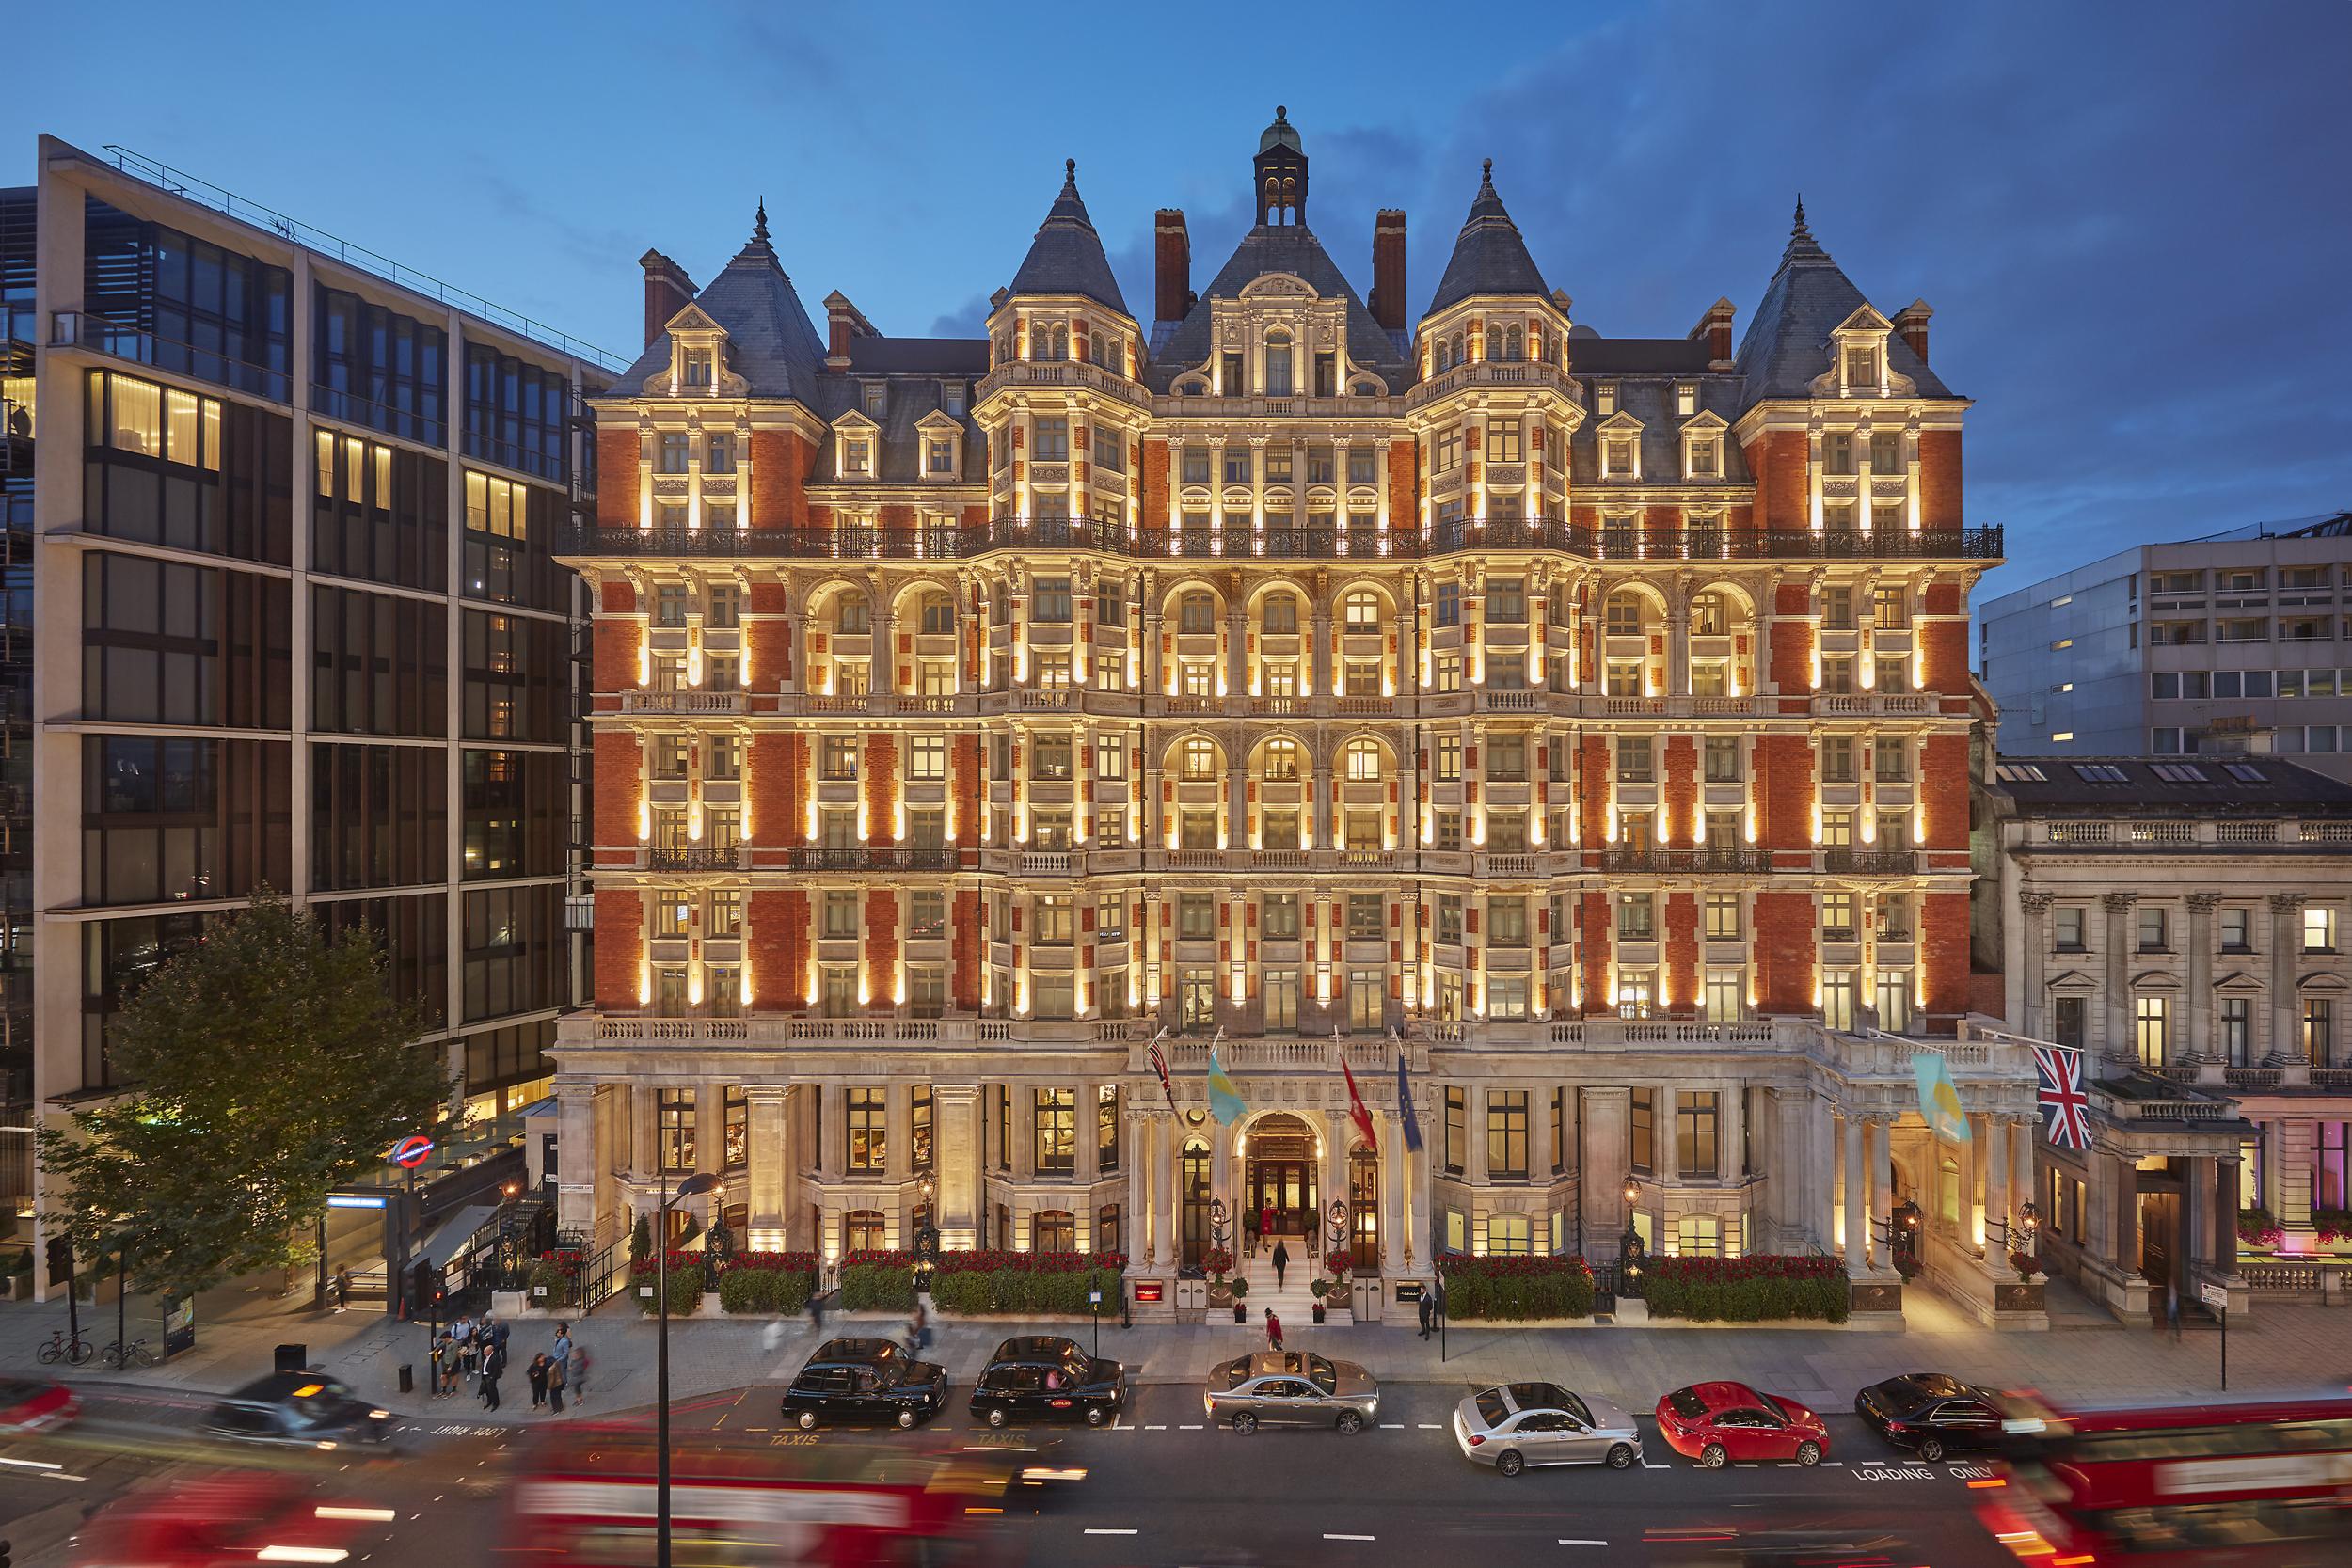 The Mandarin Oriental has reopened after an extensive renovation